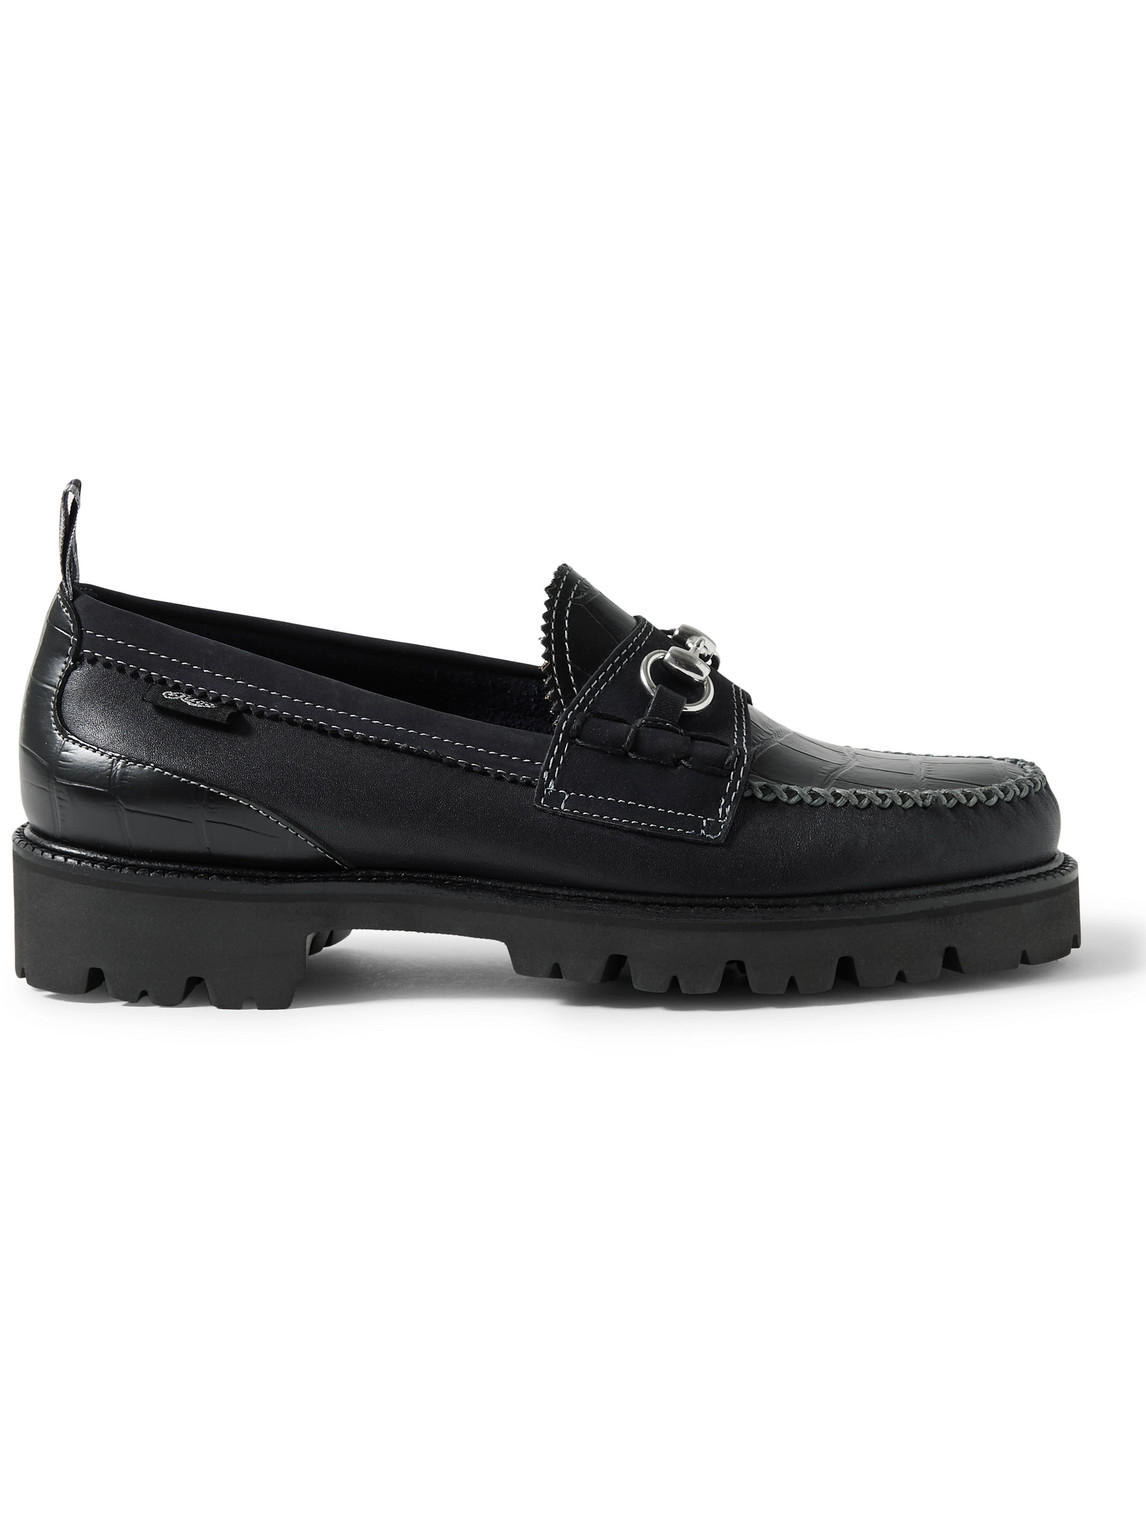 Nicholas Daley Lincoln Weejuns® Embellished Suede-Trimmed Croc-Effect Leather Loafers